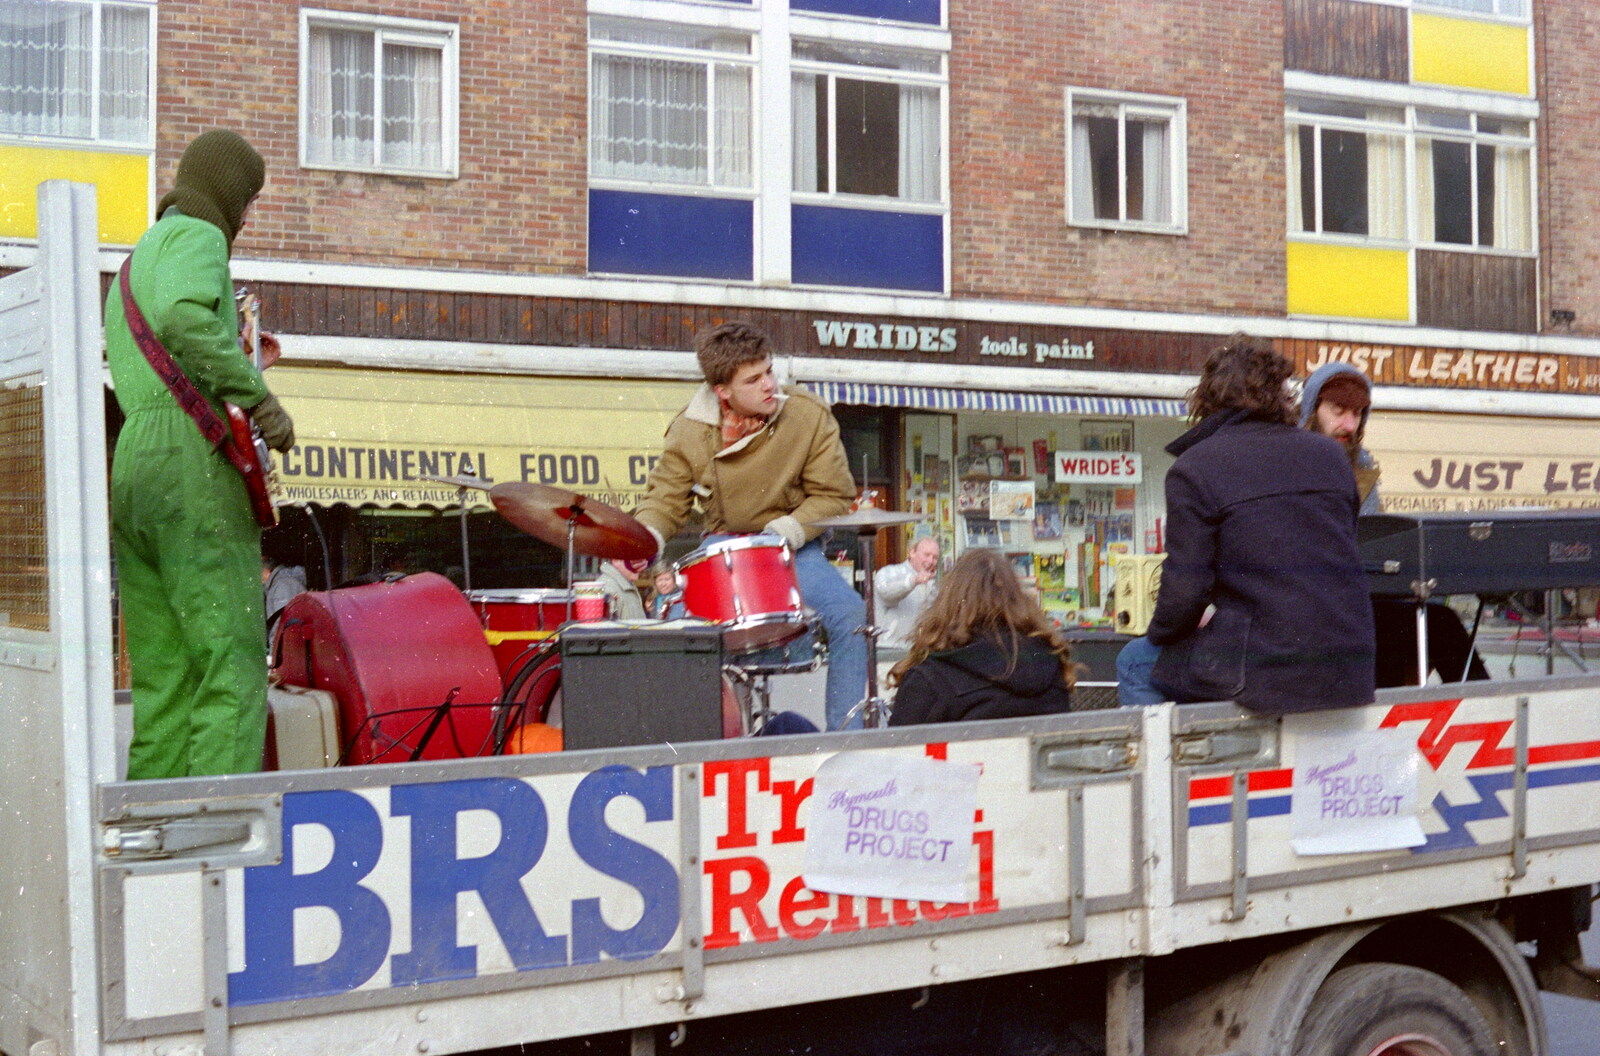 A mobile band on Cornwall Street from Uni: PPSU "Jazz" RAG Street Parade, Plymouth, Devon - 17th February 1986